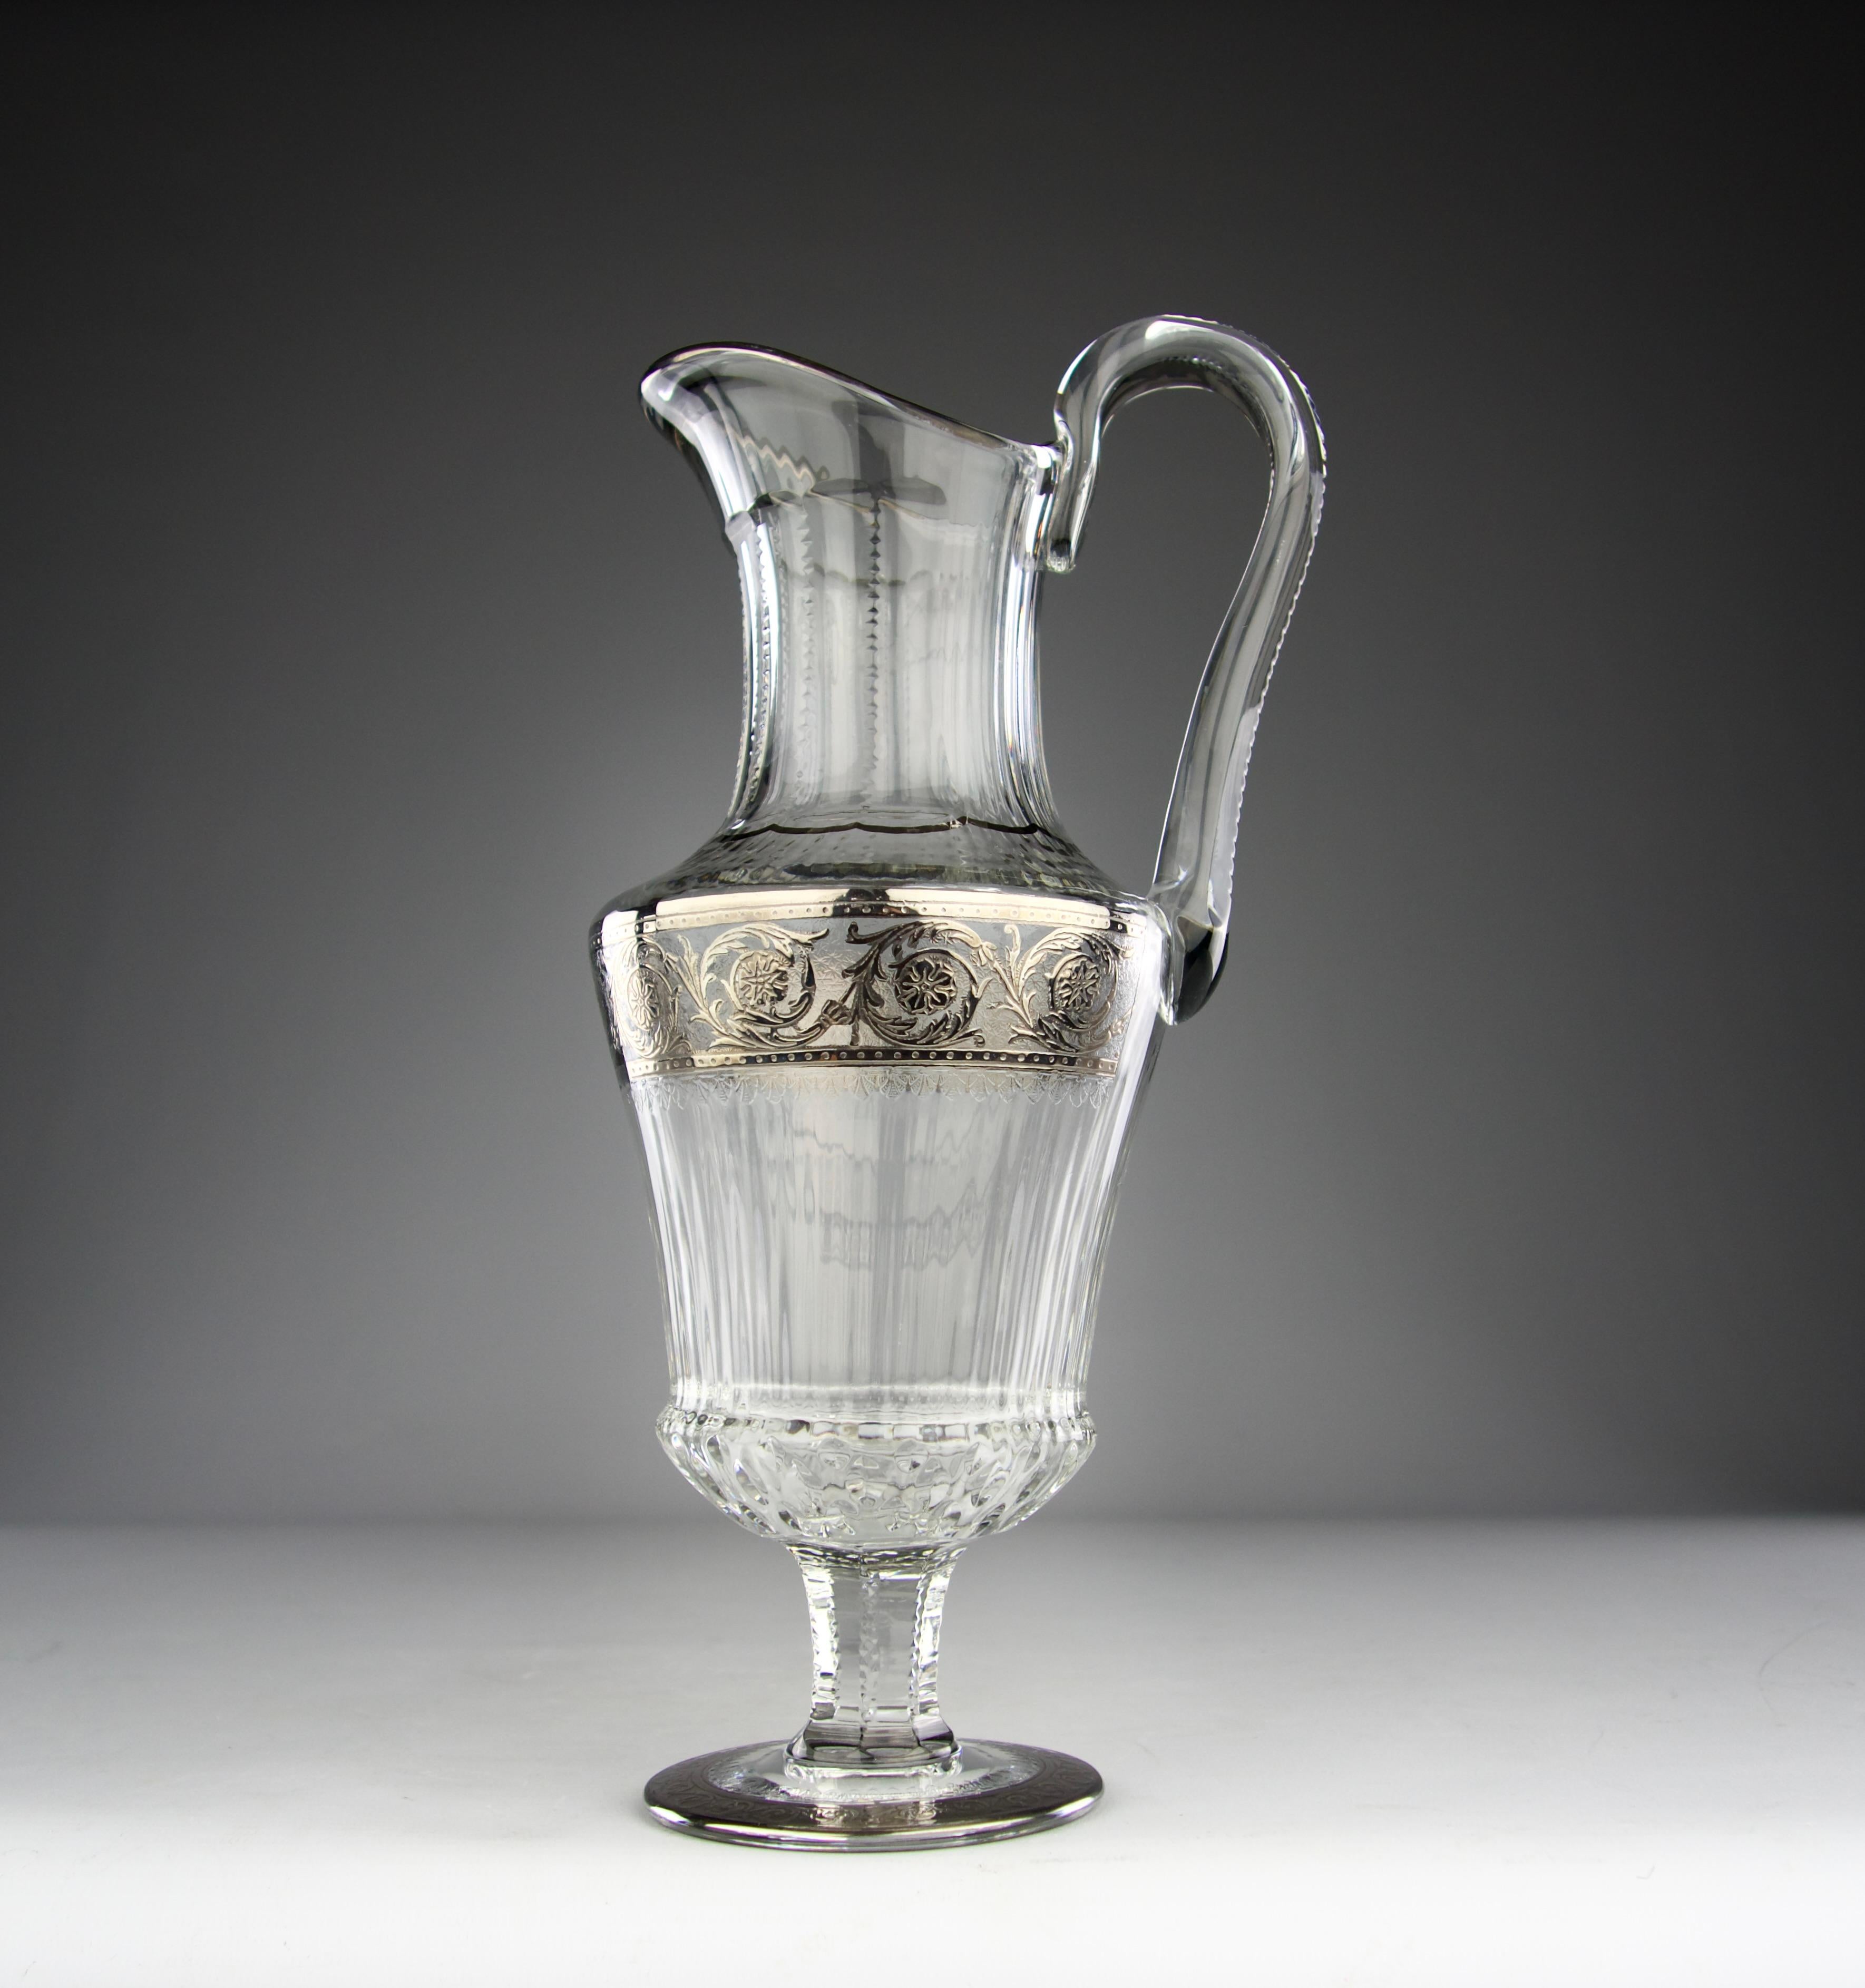 Beautiful platinum Thistle model carafe by the Saint-Louis manufacture, France 2000s.

Excellent condition.

Dimensions in cm ( H x L x l ) : 30.5 x 15 x 10

Secure shipping.